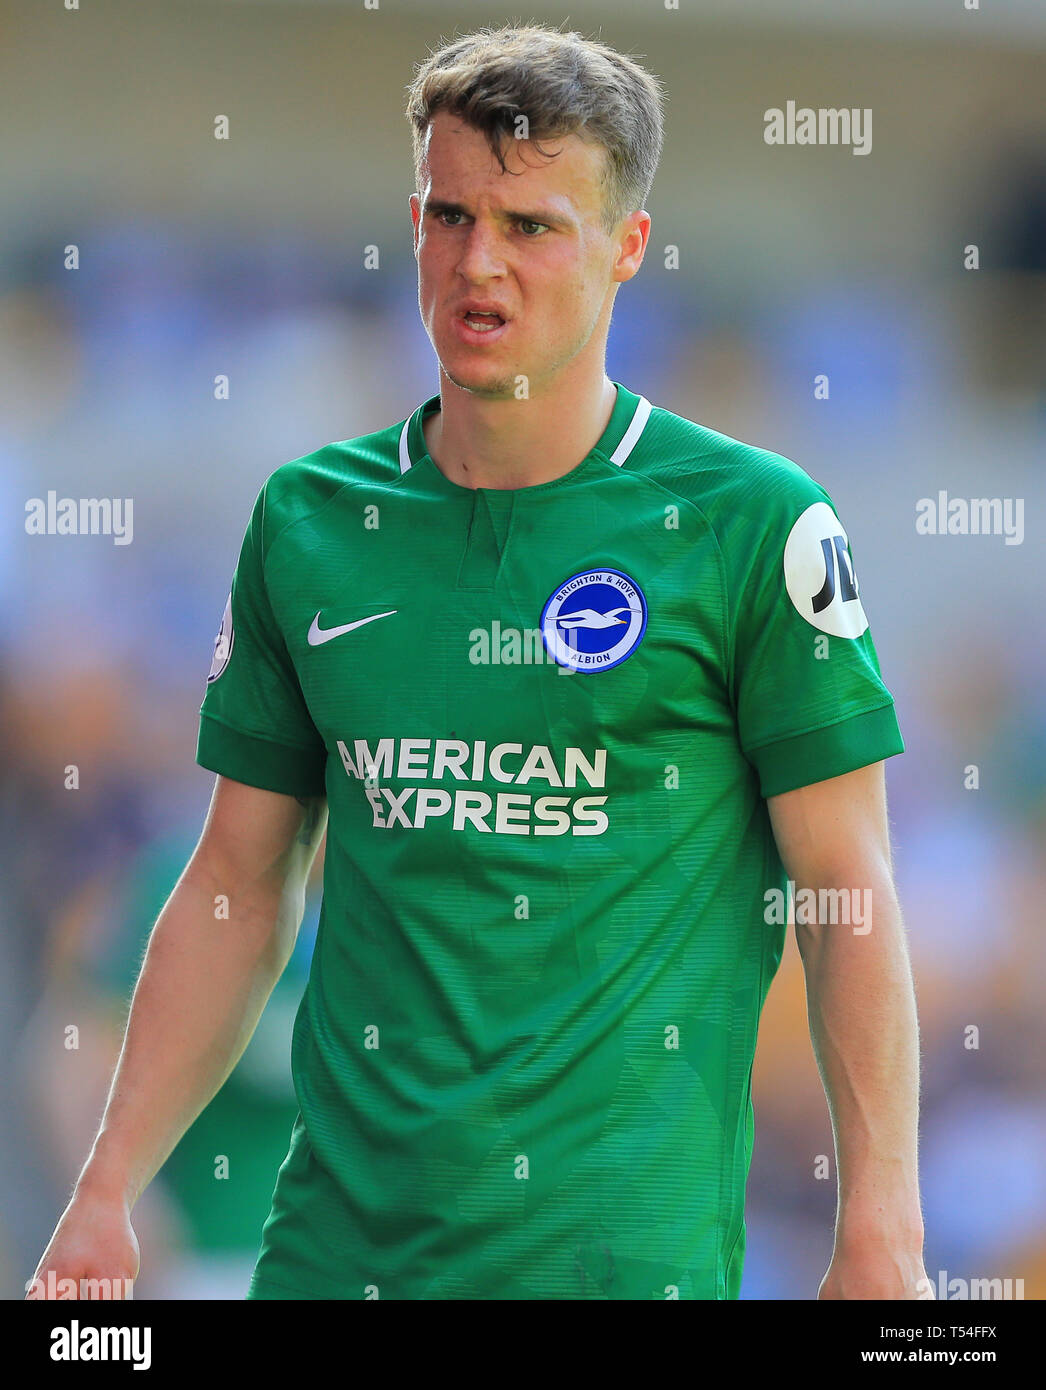 Wolverhampton, UK. 20th Apr, 2019. Lewis Dunk of Brighton and Hove Albion in action during the match between Wolverhampton Wanderers and Brighton and Hove Albion. Credit: Paul Roberts/One Up Top/Alamy Live News Stock Photo